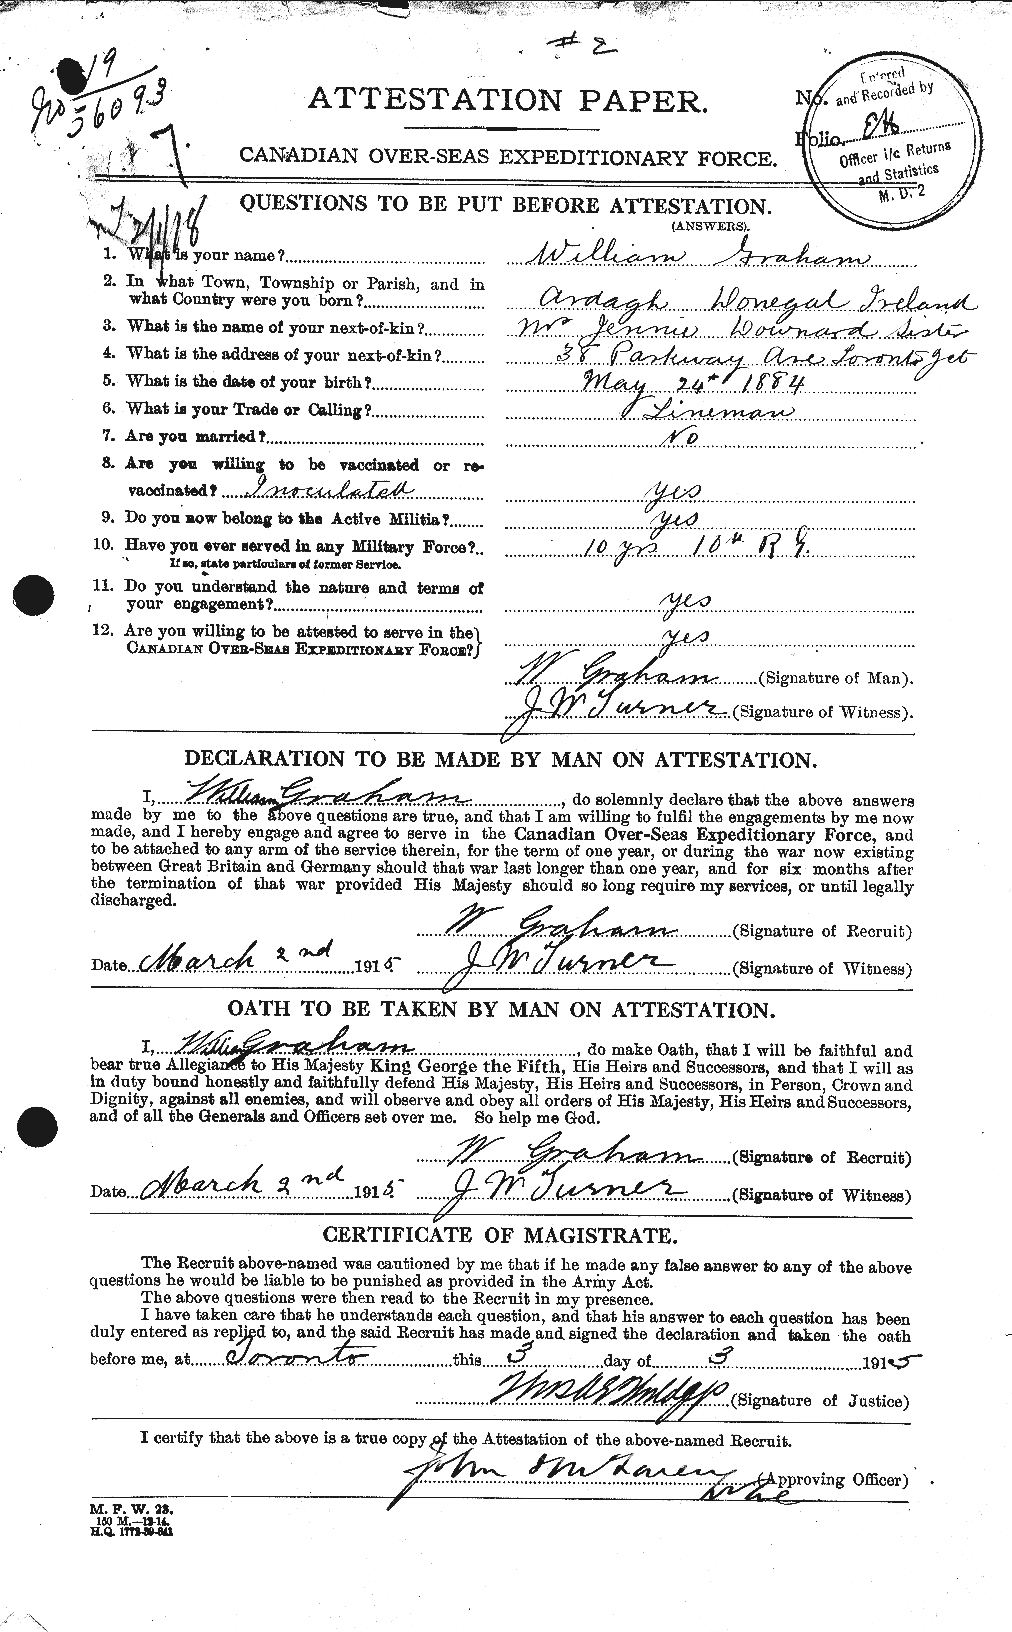 Personnel Records of the First World War - CEF 362681a